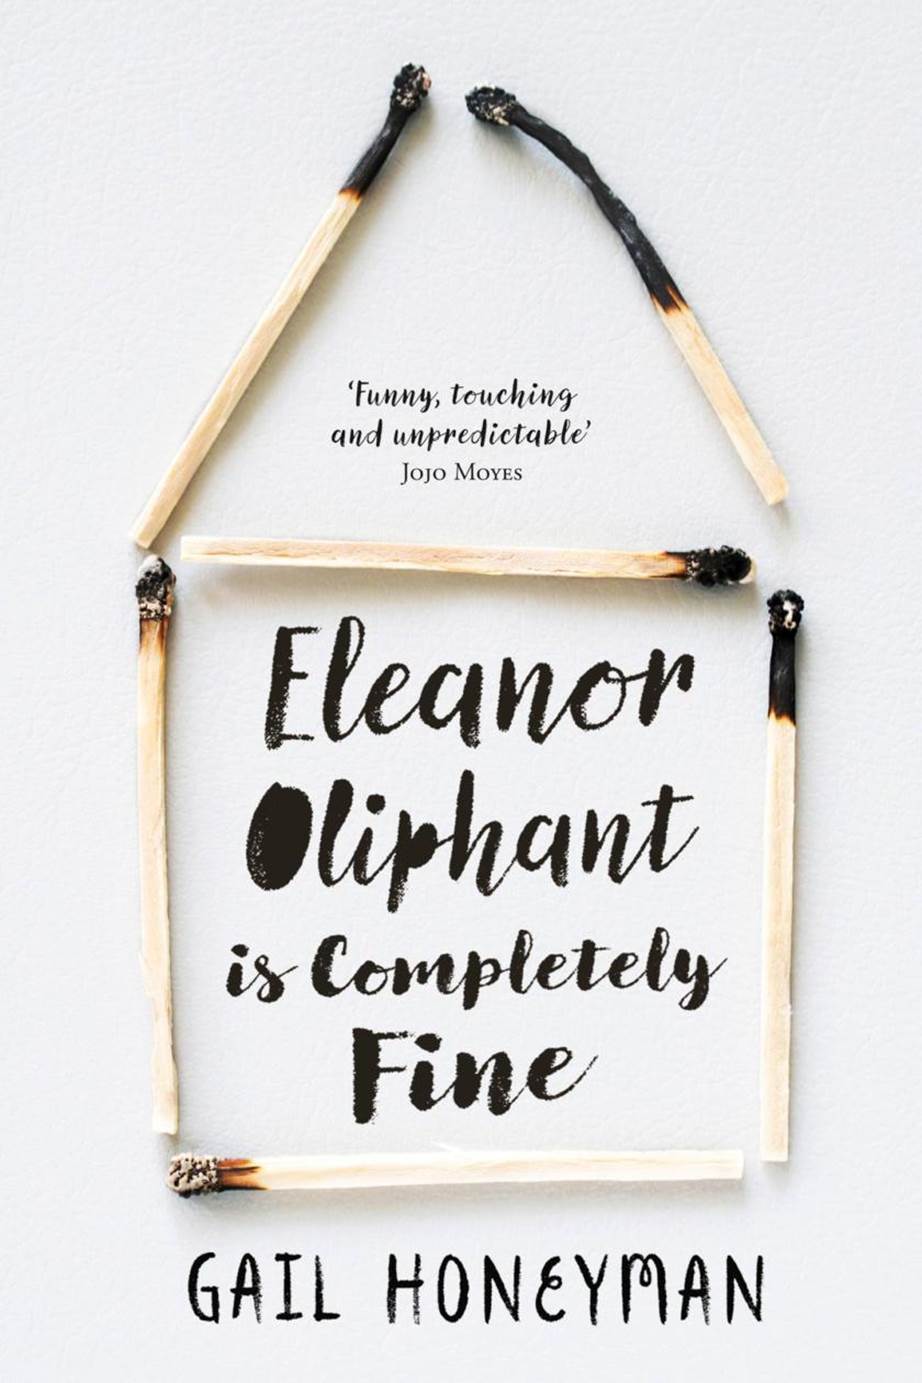 Book Review: Eleanor Oliphant Is Completely Fine